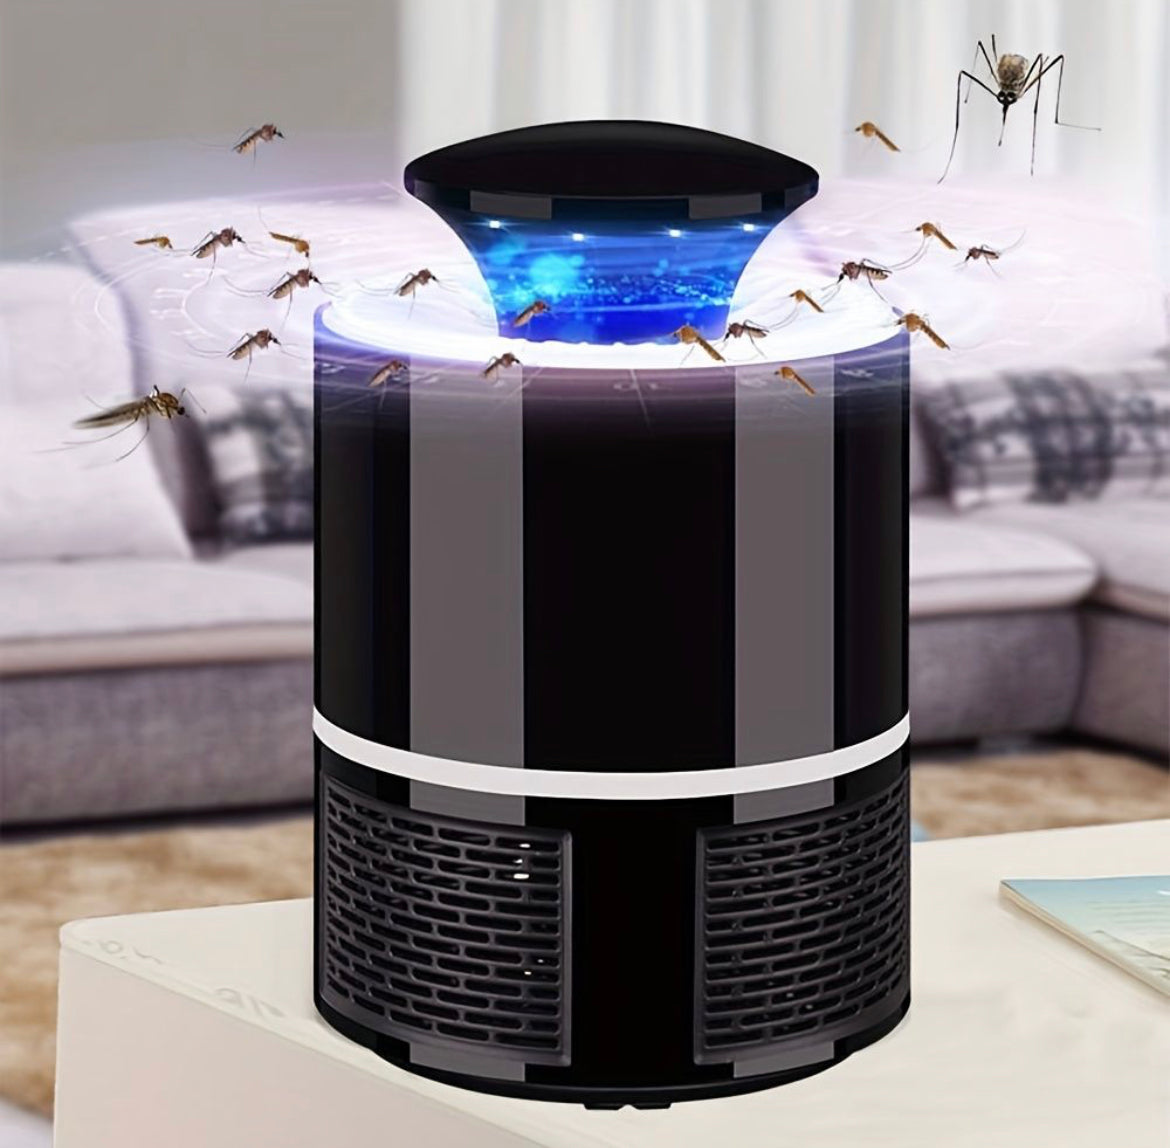 Katchy Indoor Insect Trap | Bug Light & Sticky Glue for Mosquitos, Gnats, Moths & Fruit Flies